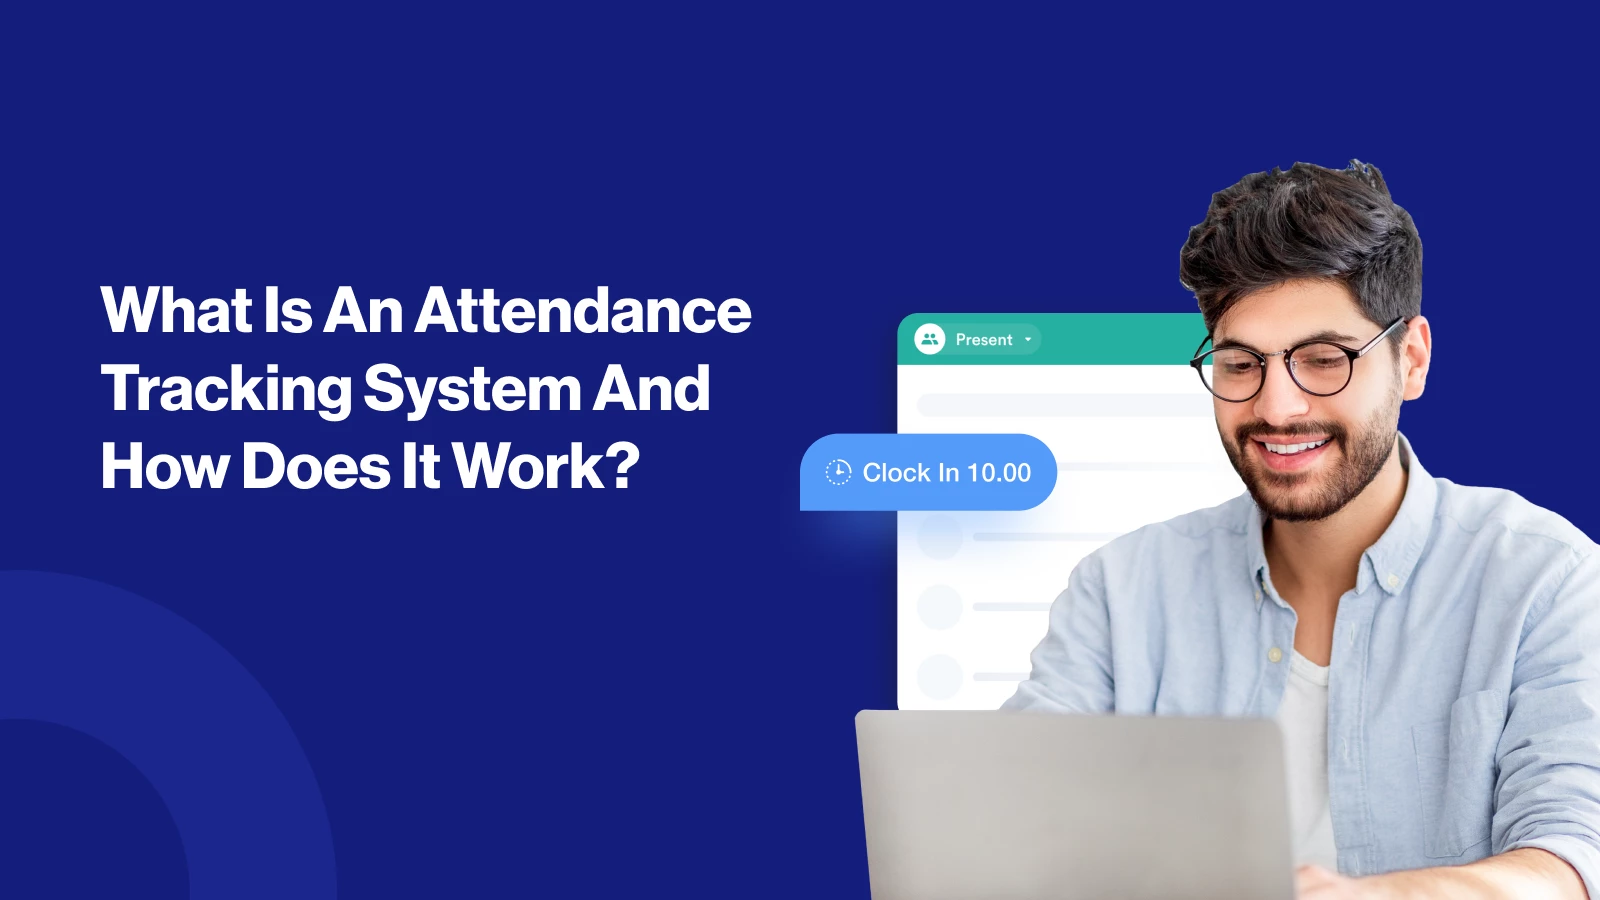 What Is An Attendance Tracking System And How Does It Work?